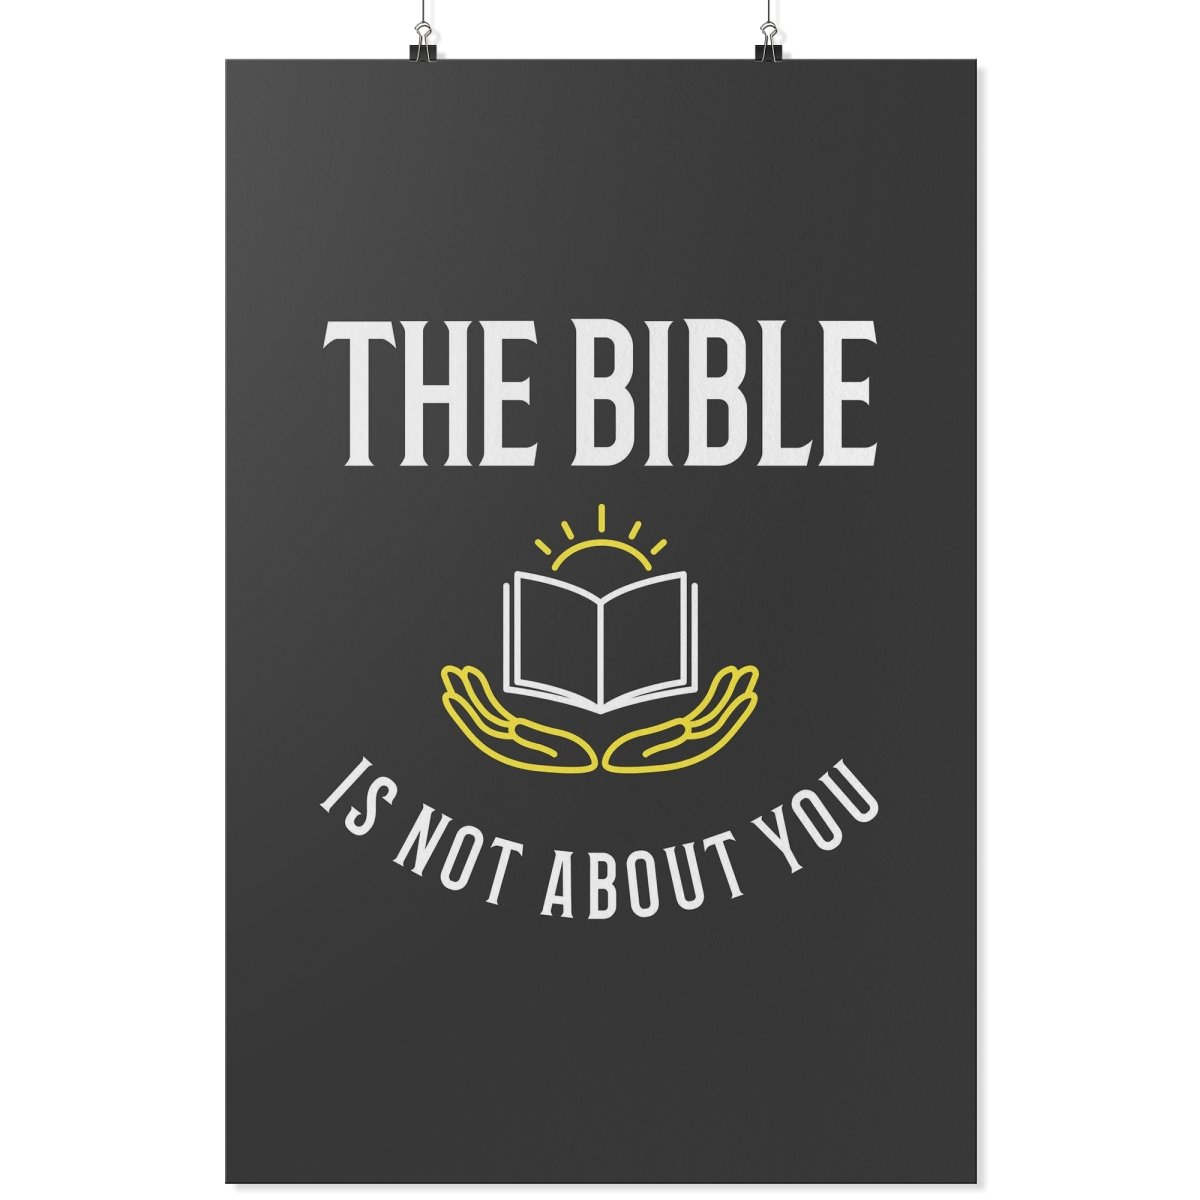 The Bible is not about you! (Wall Poster) - SDG Clothing